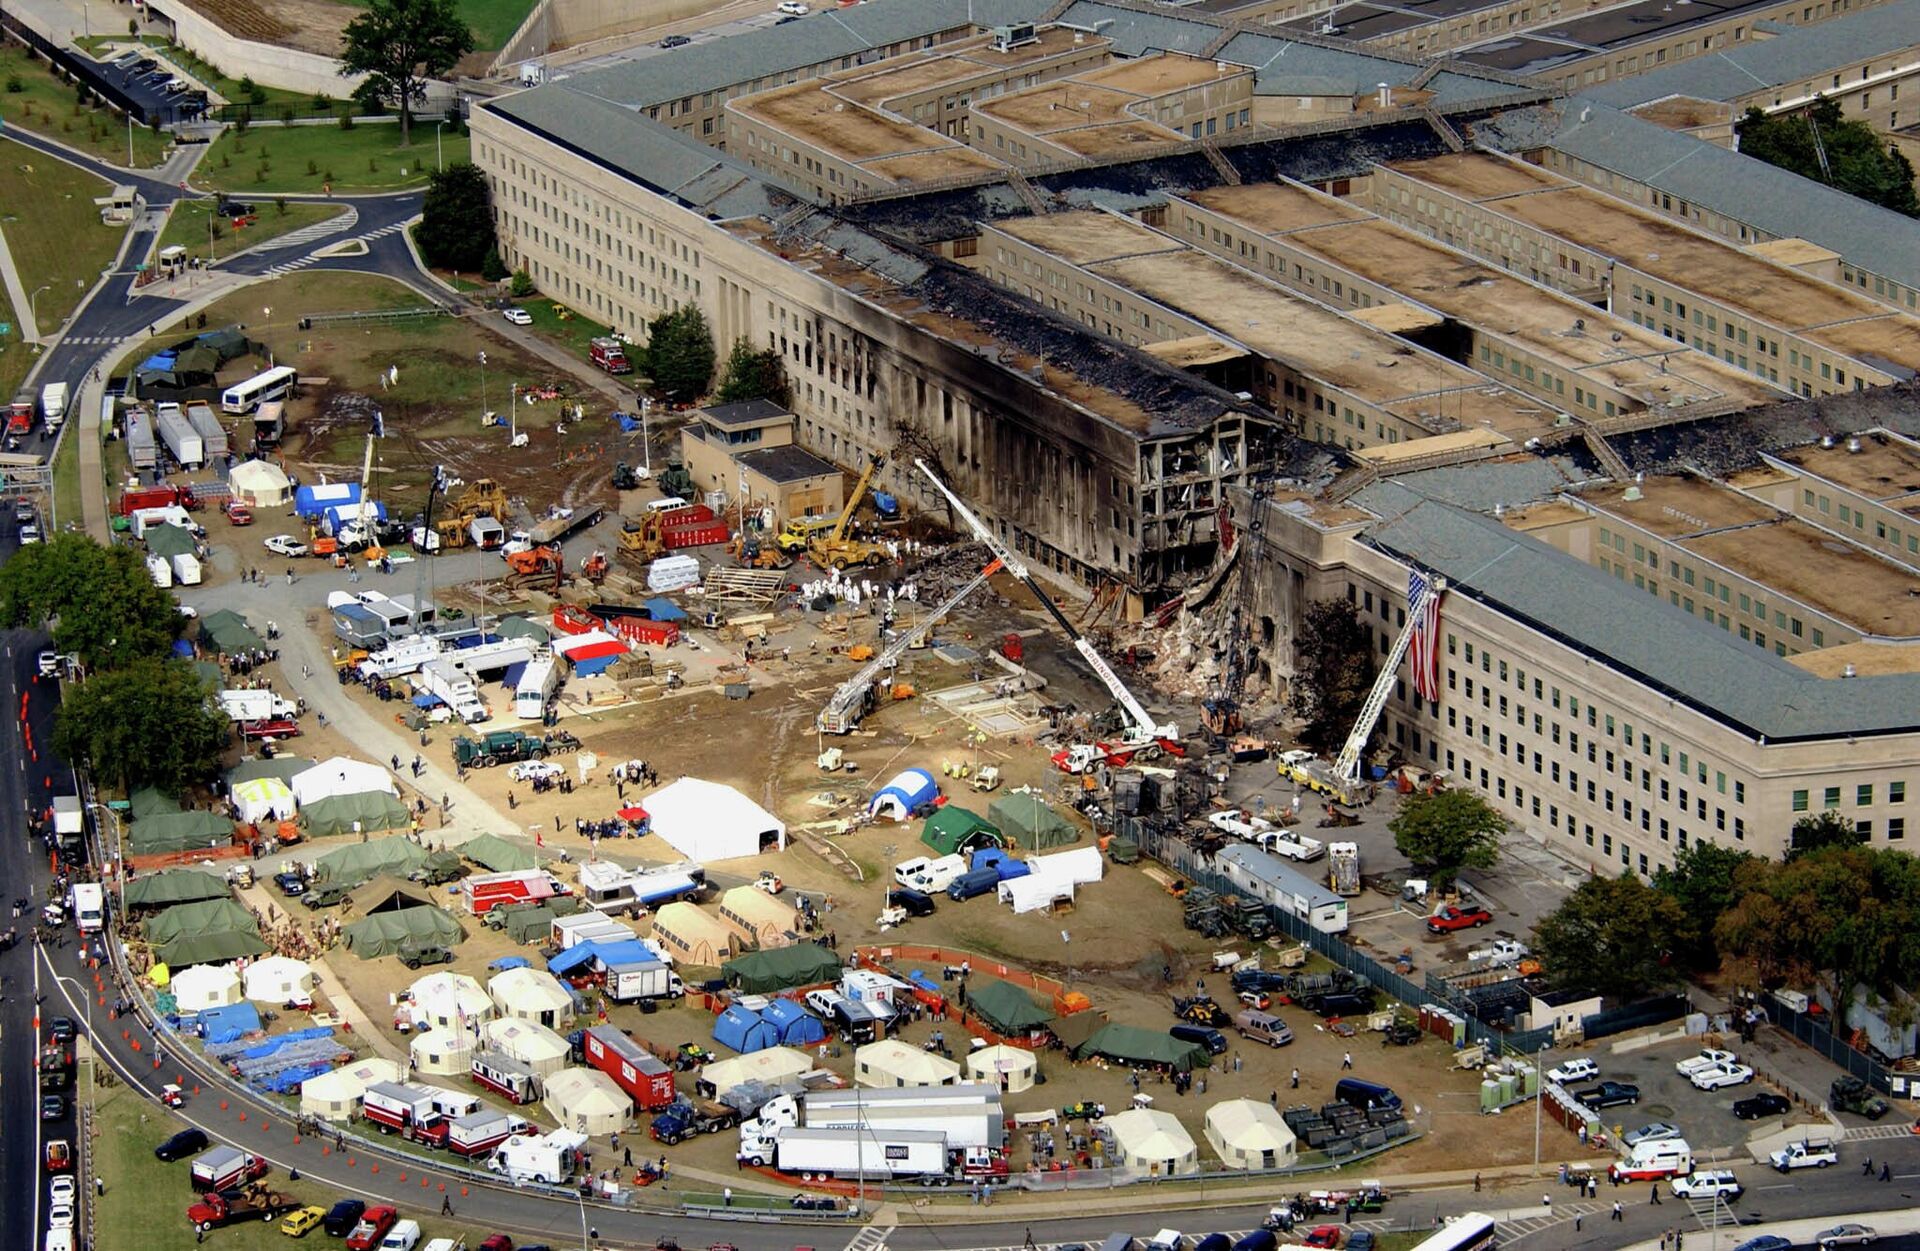  FBI agents, fire fighters, rescue workers and engineers work at the Pentagon crash site in Washington, U.S., September 14, 2001 - Sputnik International, 1920, 10.09.2021